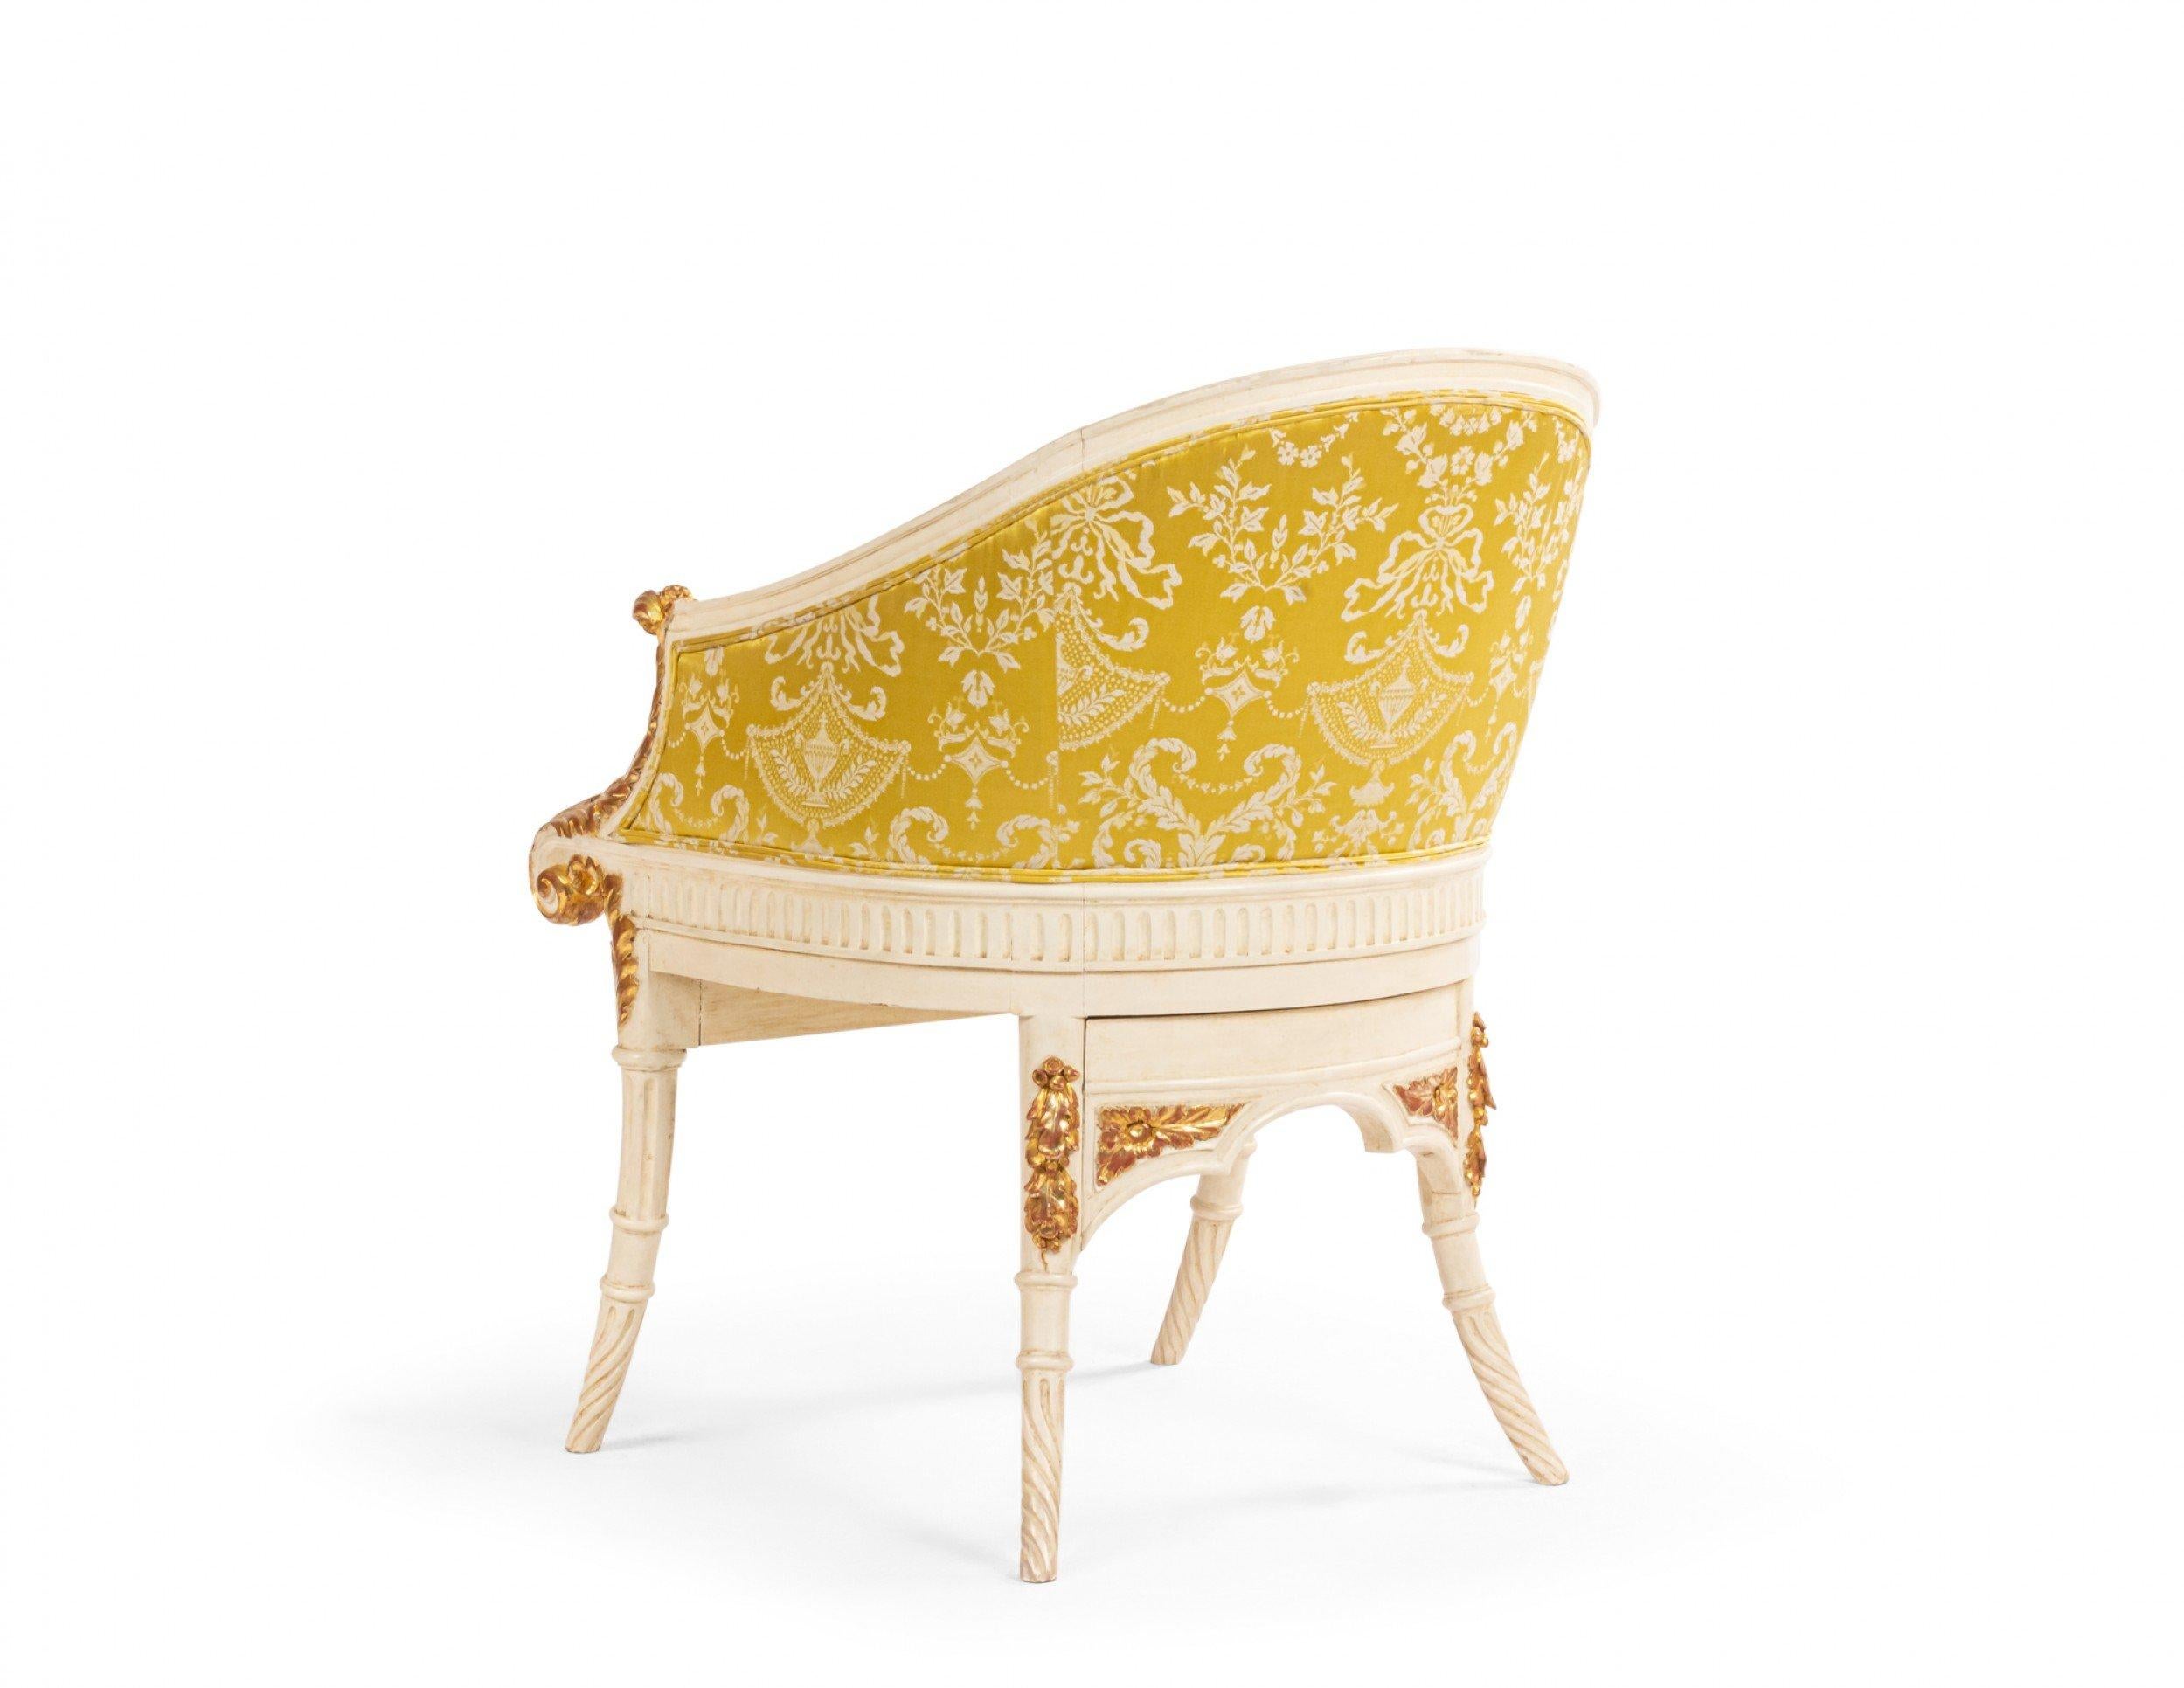 Italian Neo-Classic Style 19th Century White and Gold Arm Chair For Sale 1